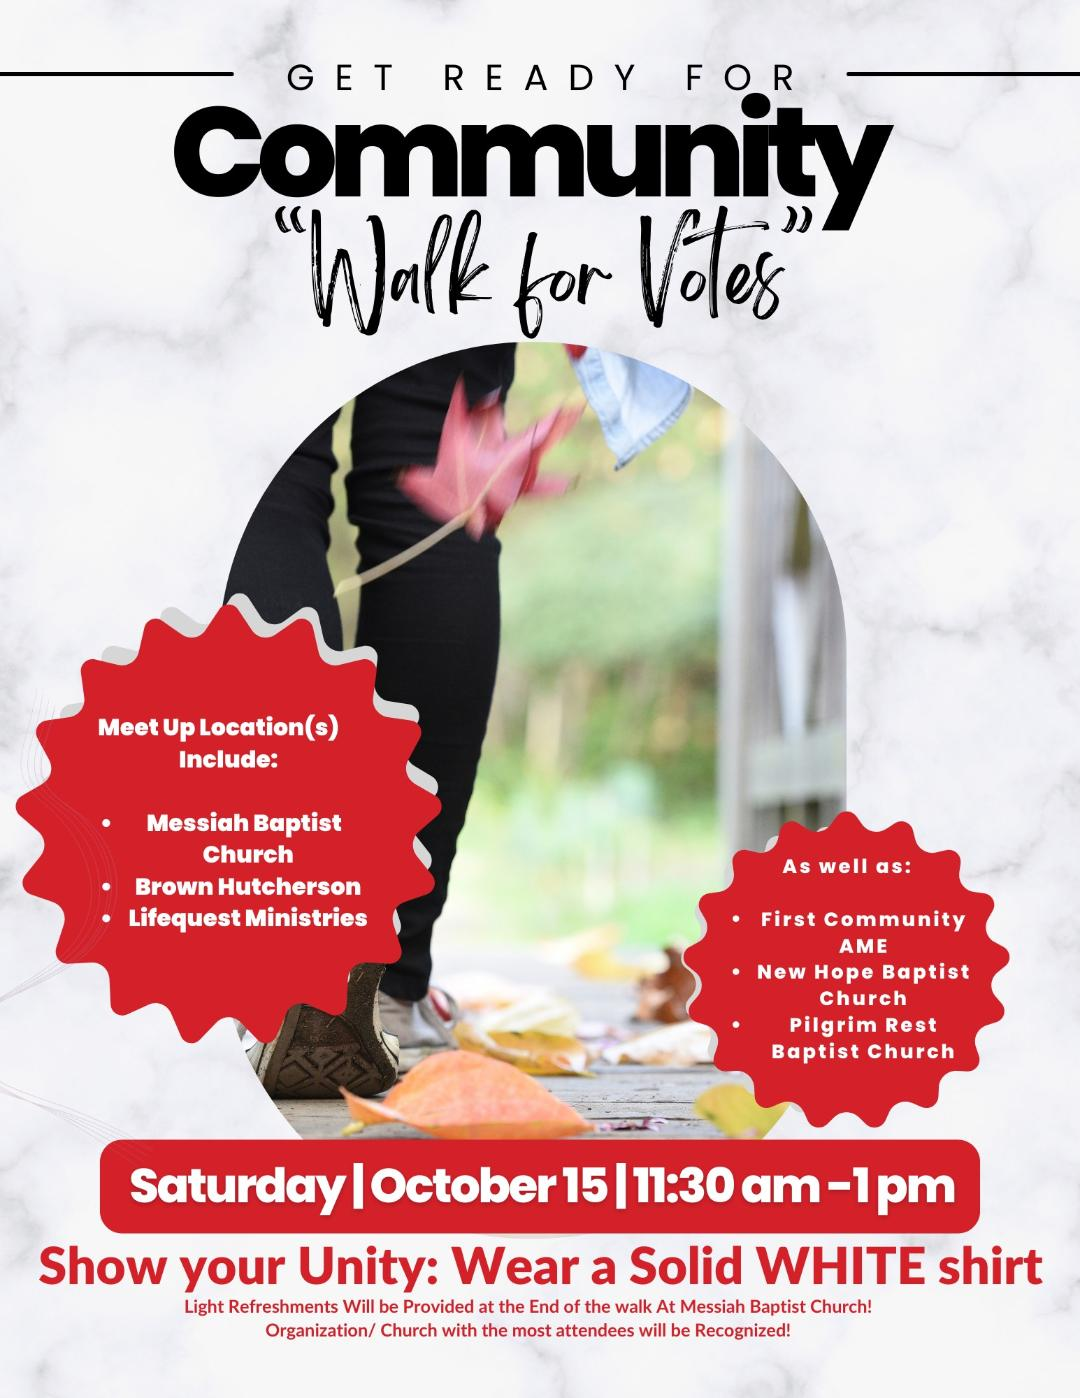 Get ready for Community “Walk for Votes” in Grand Rapids!